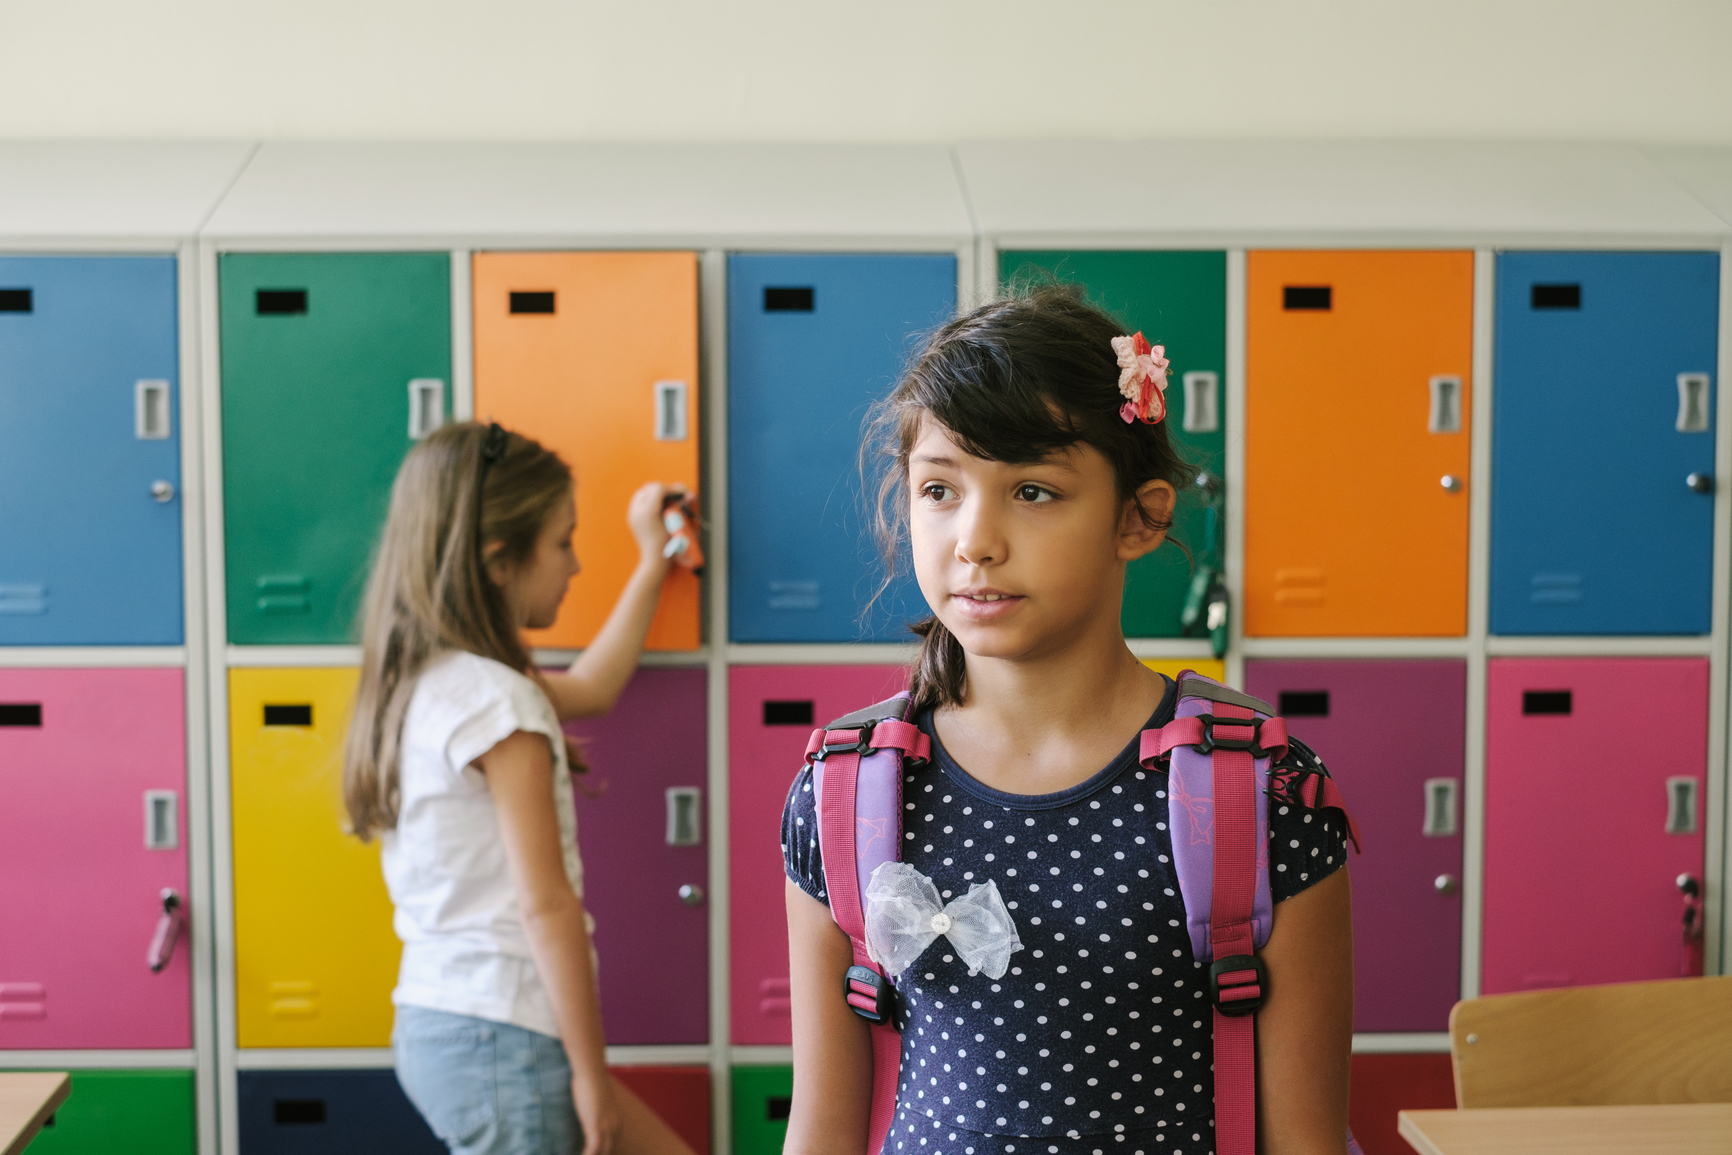 Student standing in front of color-coded lockers